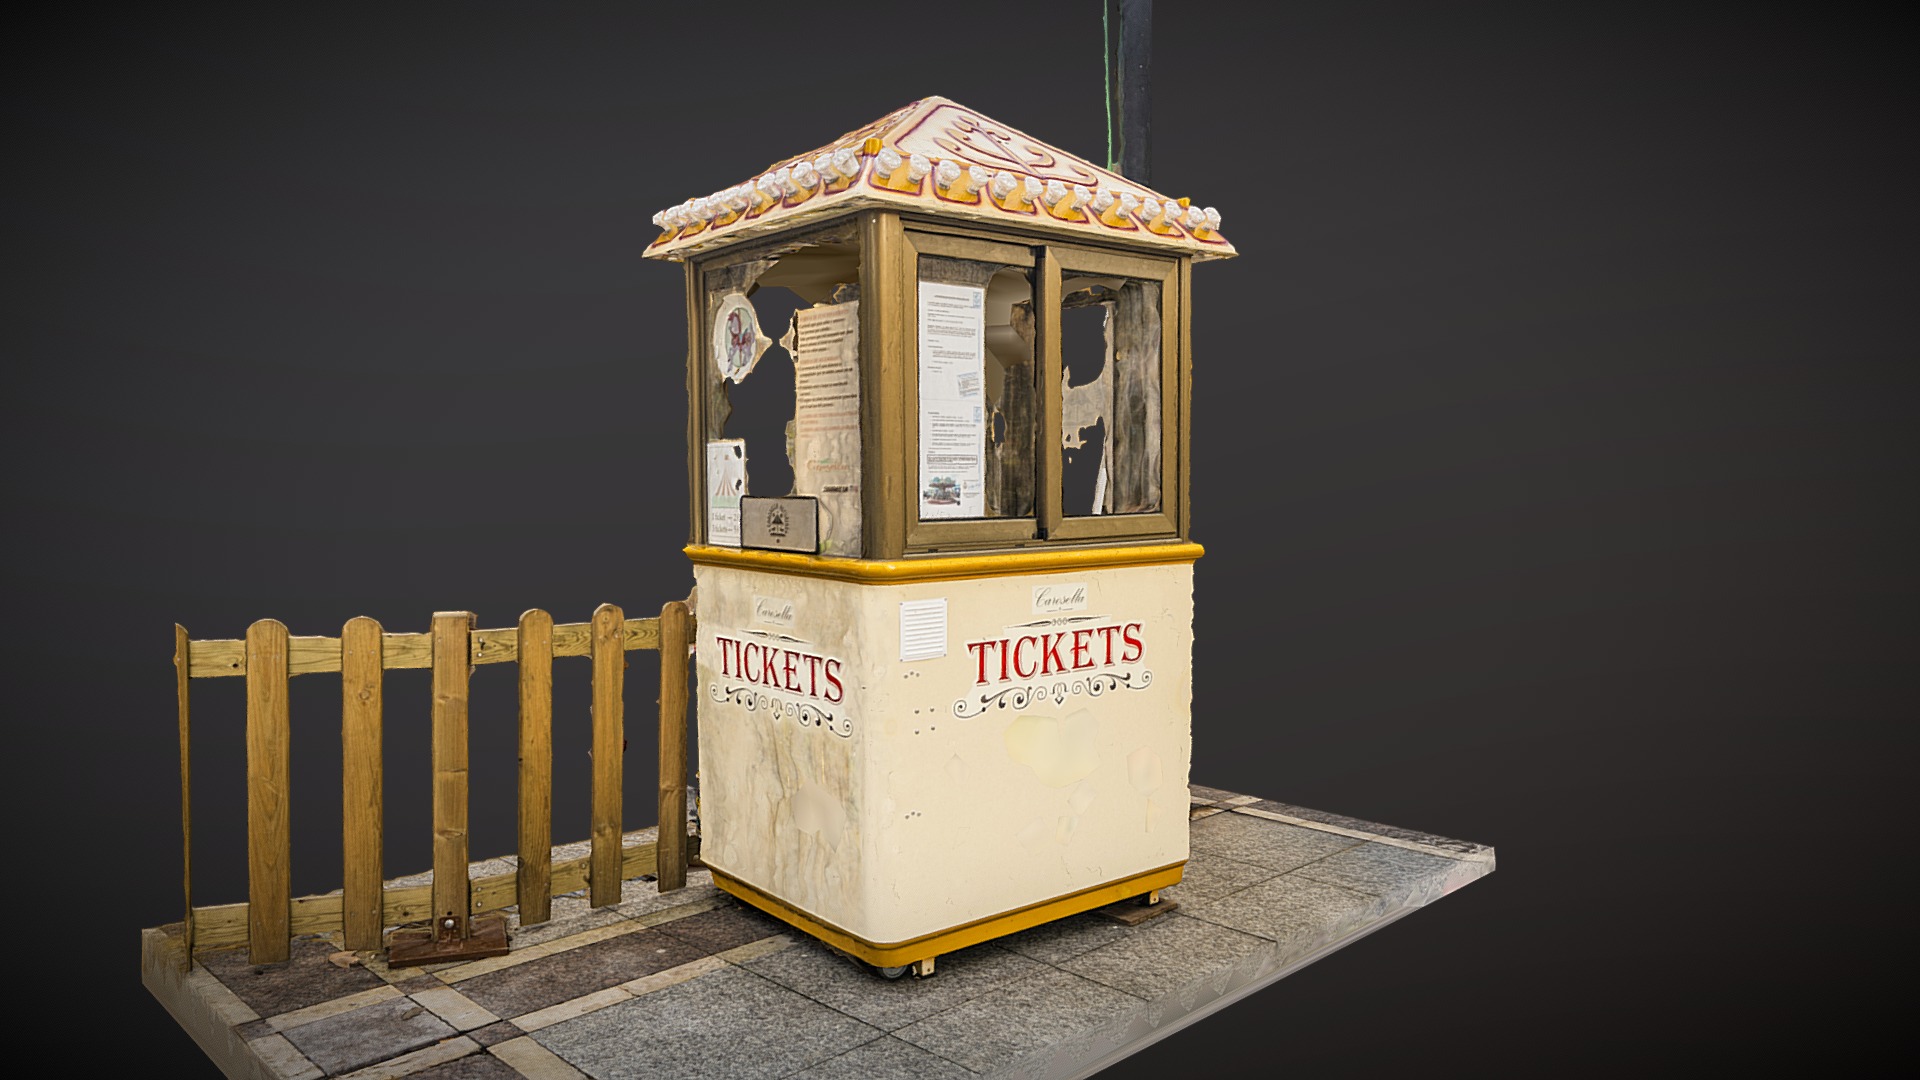 3D model Ticket booth photogrammetry scan - This is a 3D model of the Ticket booth photogrammetry scan. The 3D model is about a small yellow and white structure.